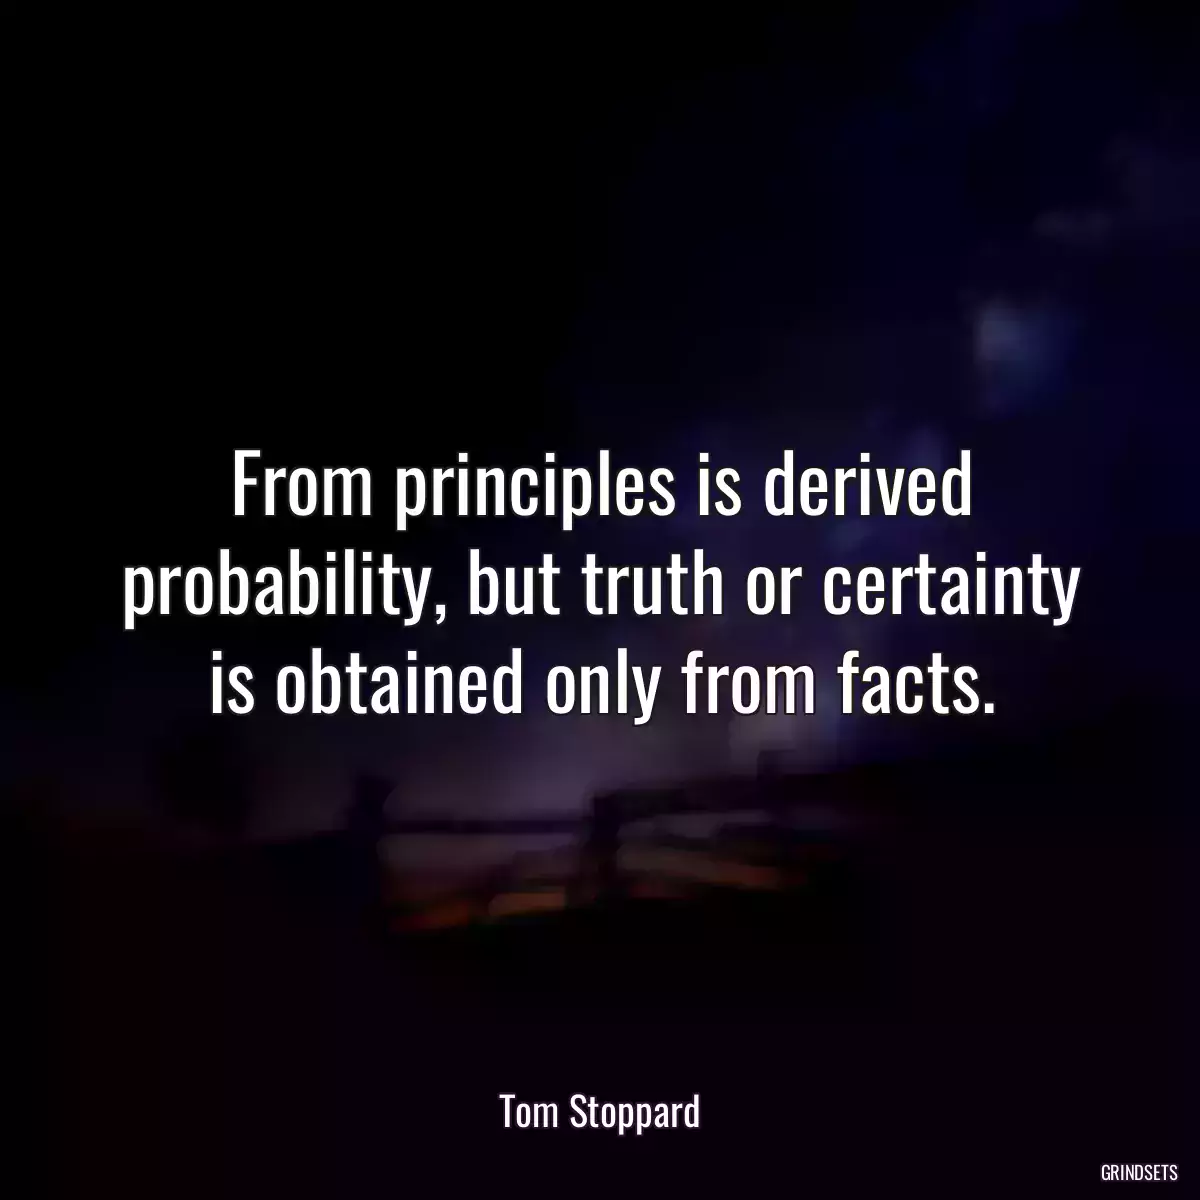 From principles is derived probability, but truth or certainty is obtained only from facts.